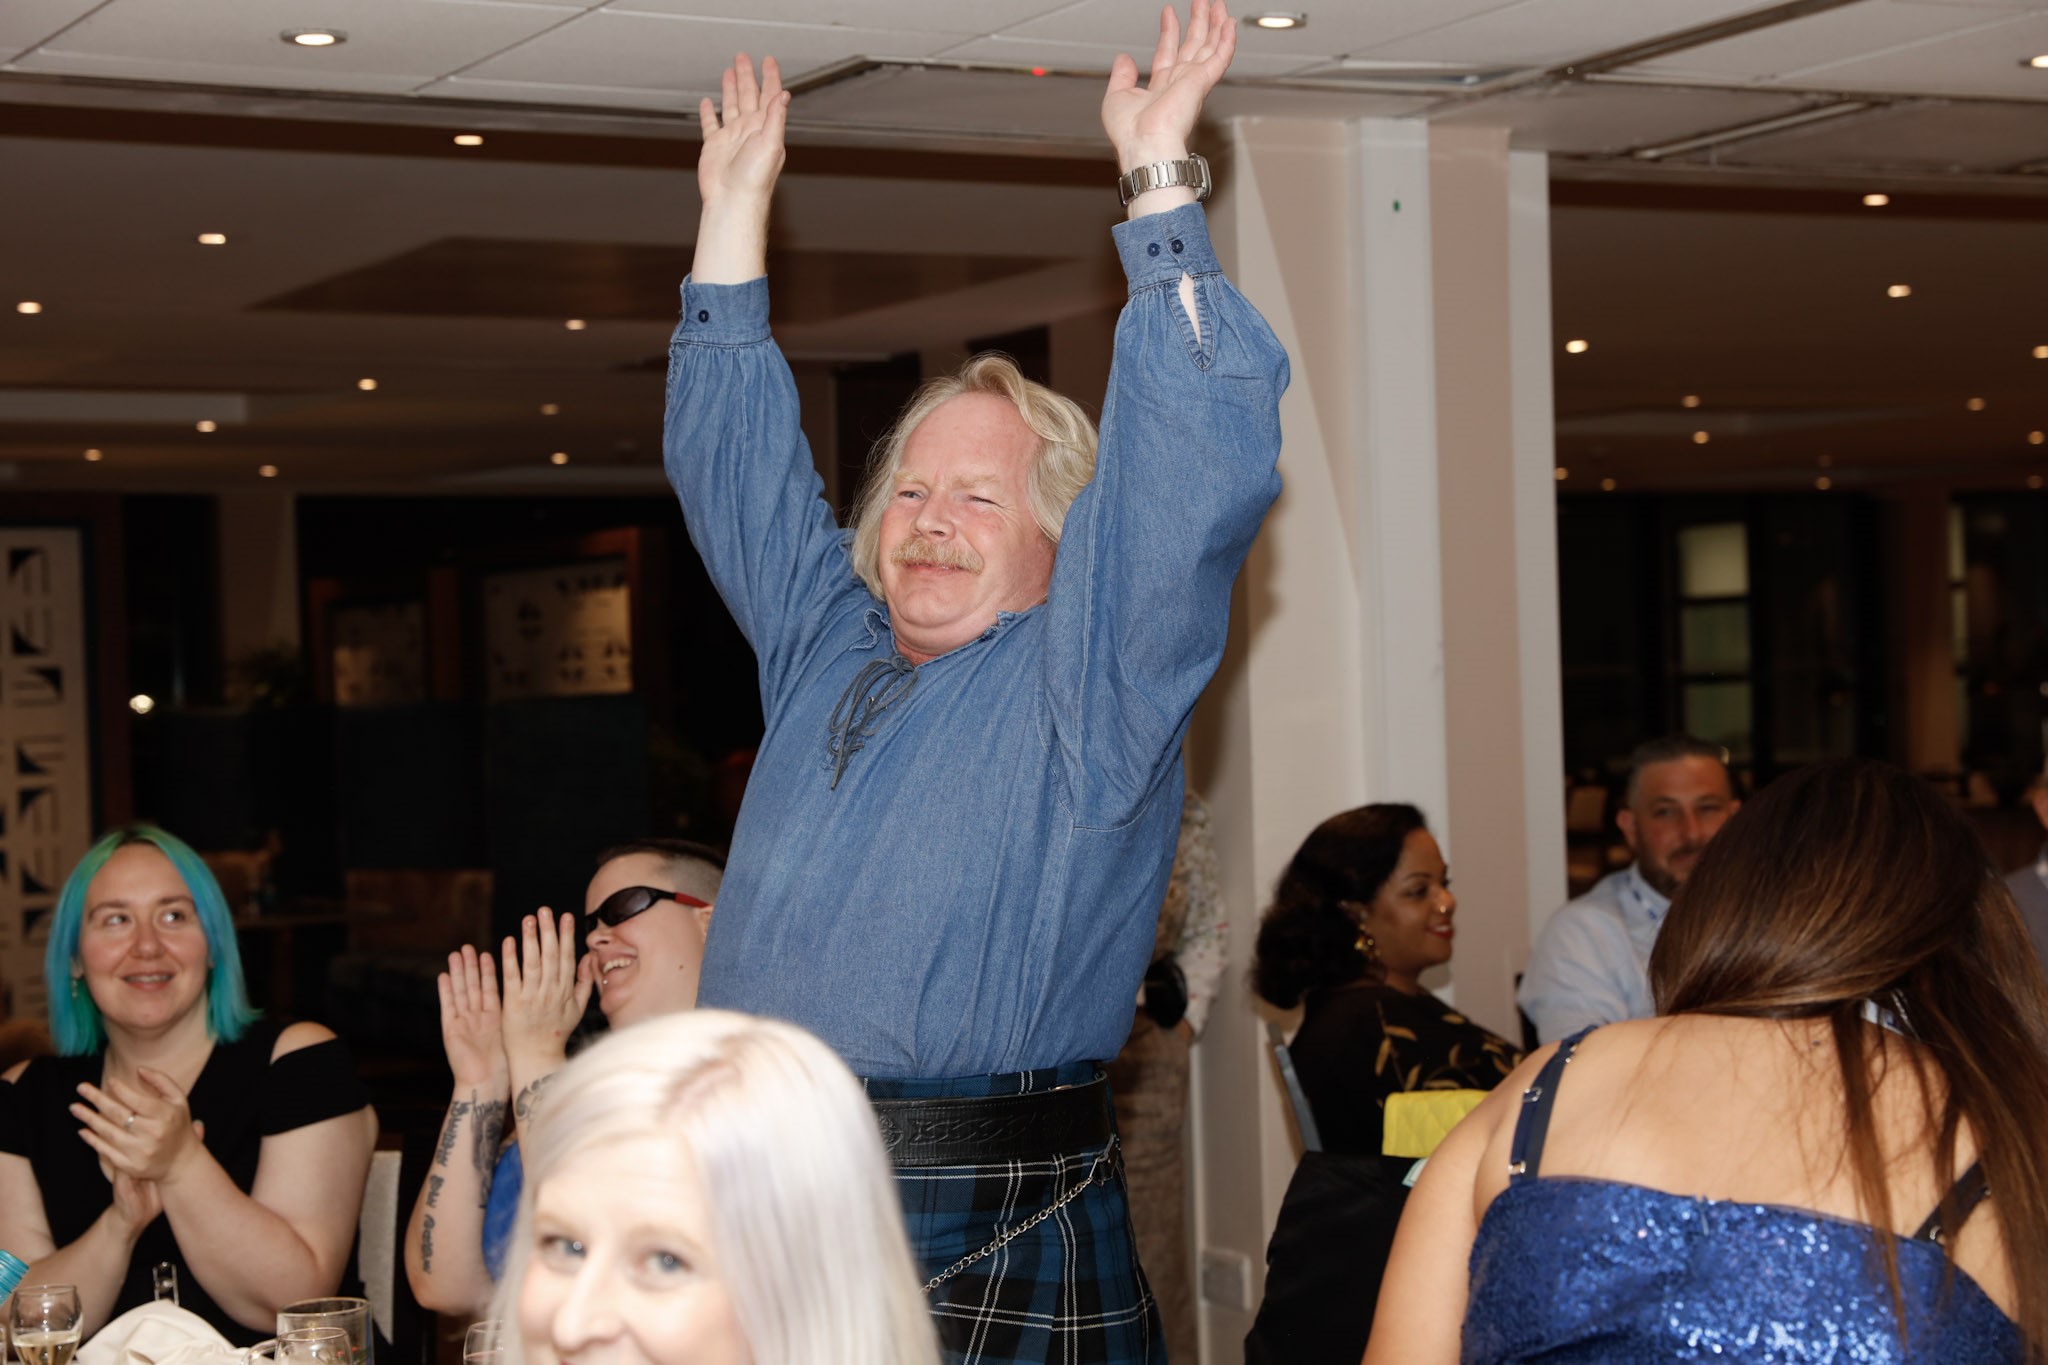 Steve Keith, Birmingham and Black Country SLC member, pictured standing up, with his hands in the air during the Rodney Powell Awards.